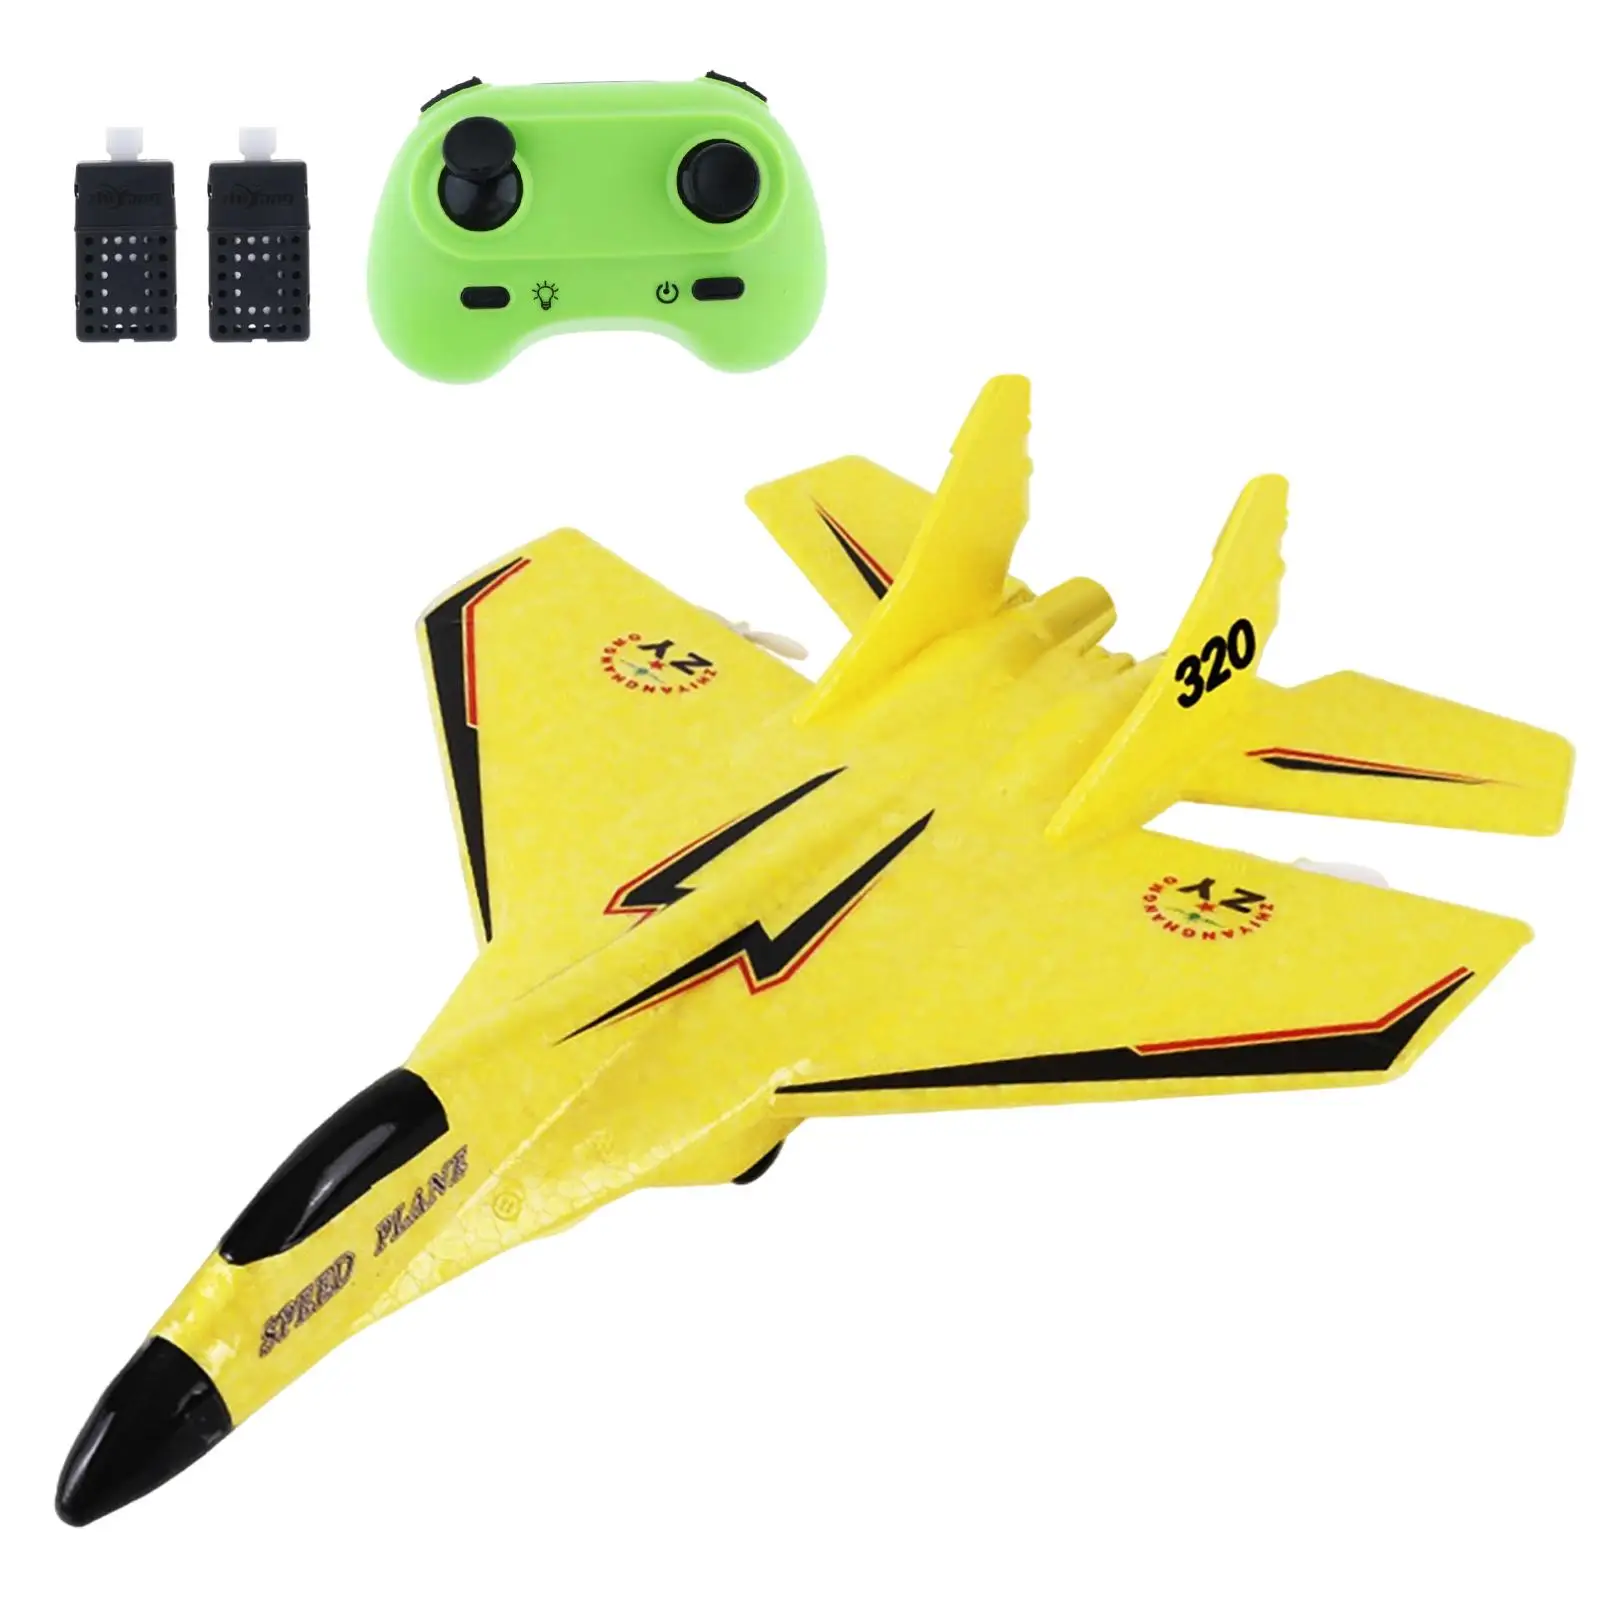 RC Plane Lightweight Outdoor Flighting Toys Ready to Fly Fighter Toys RC Aircraft Jet Hobby RC Glider for Adults Beginner